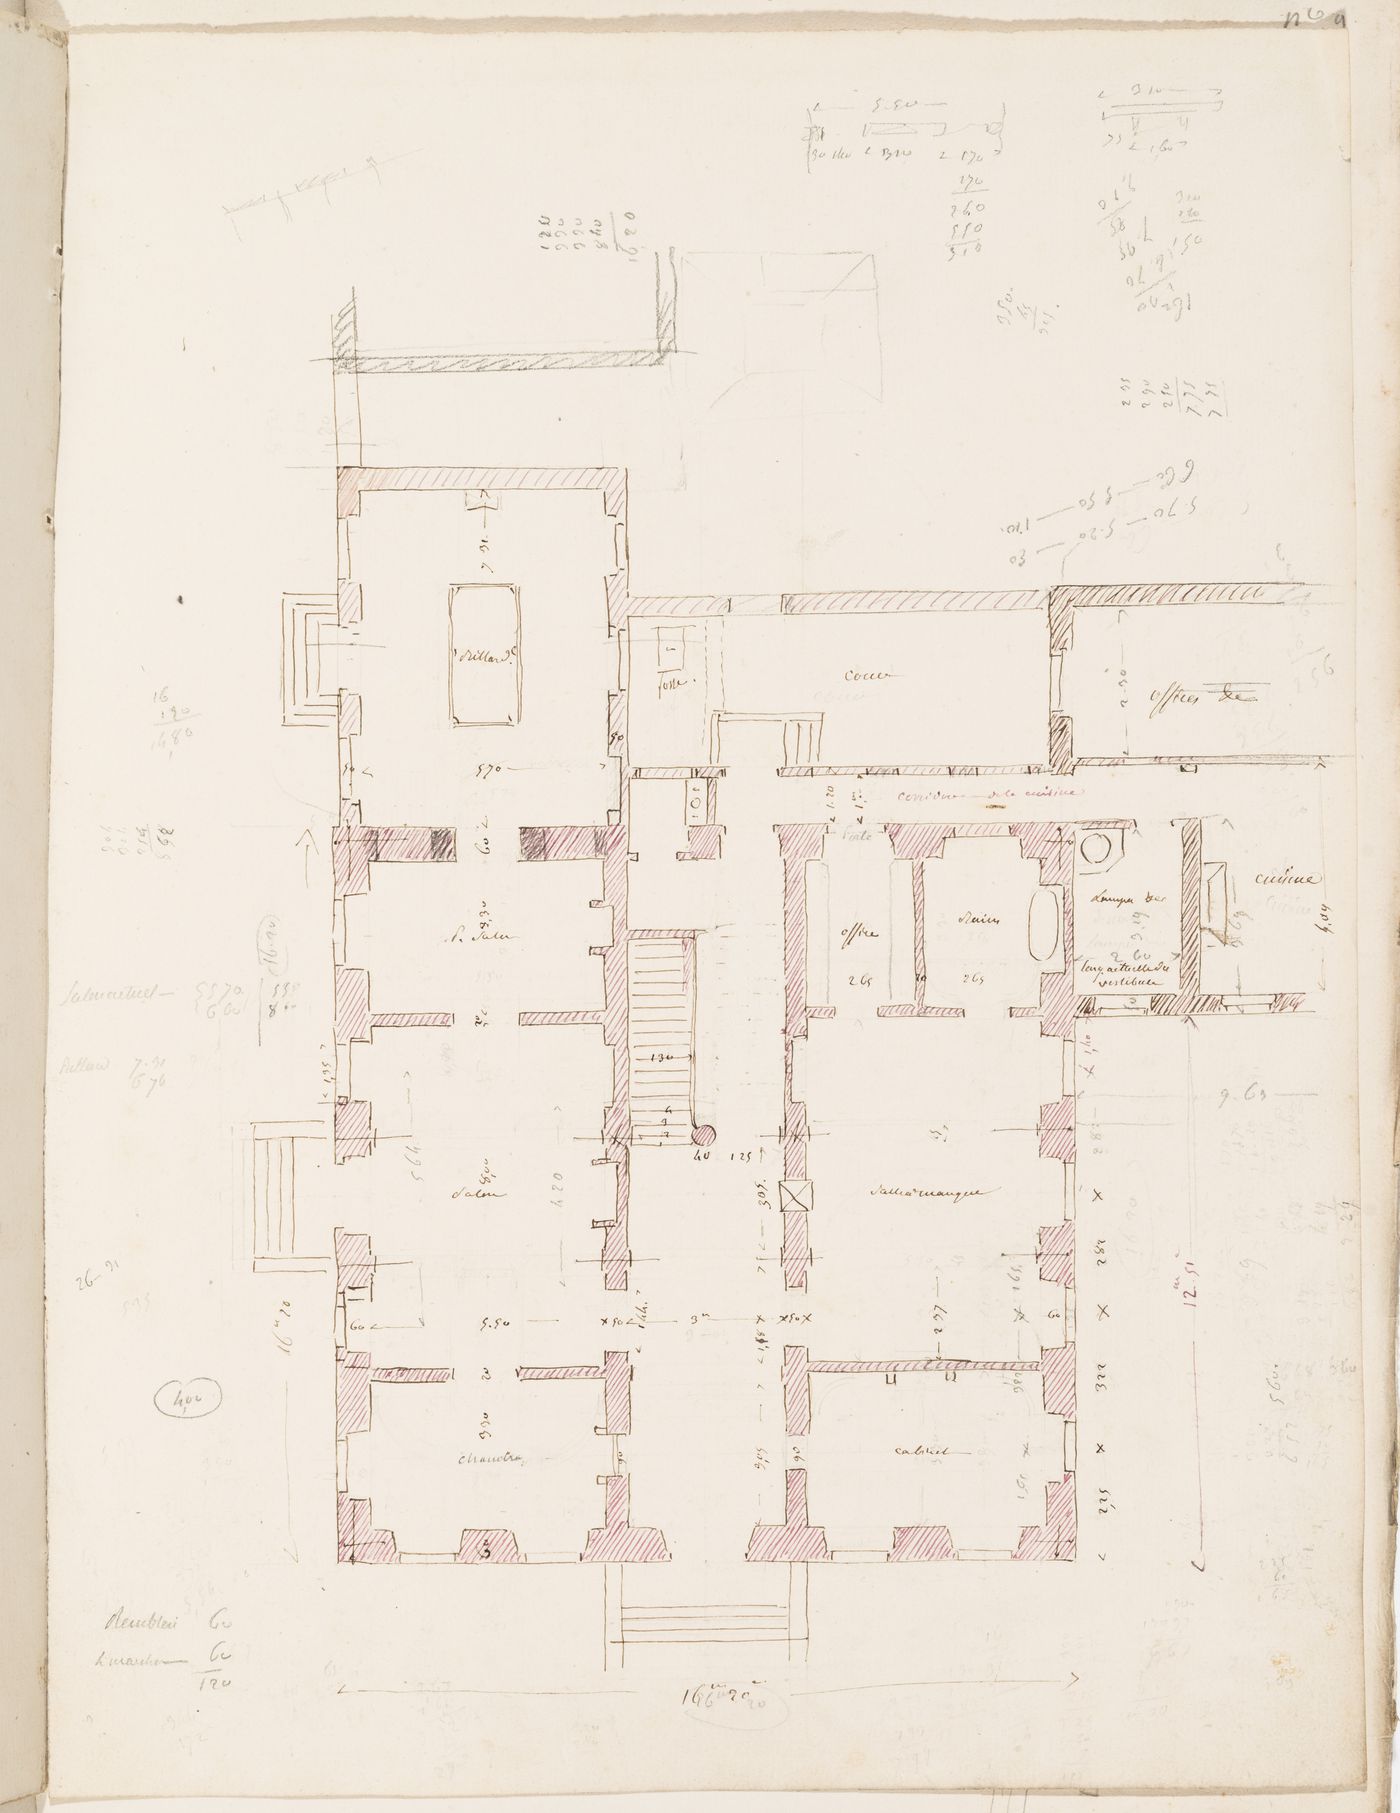 Project no. 8 for a country house for comte Treilhard: Ground floor plan; verso: Project no. 8 for a country house for M. de Treilhard: Sketch elevation and plans